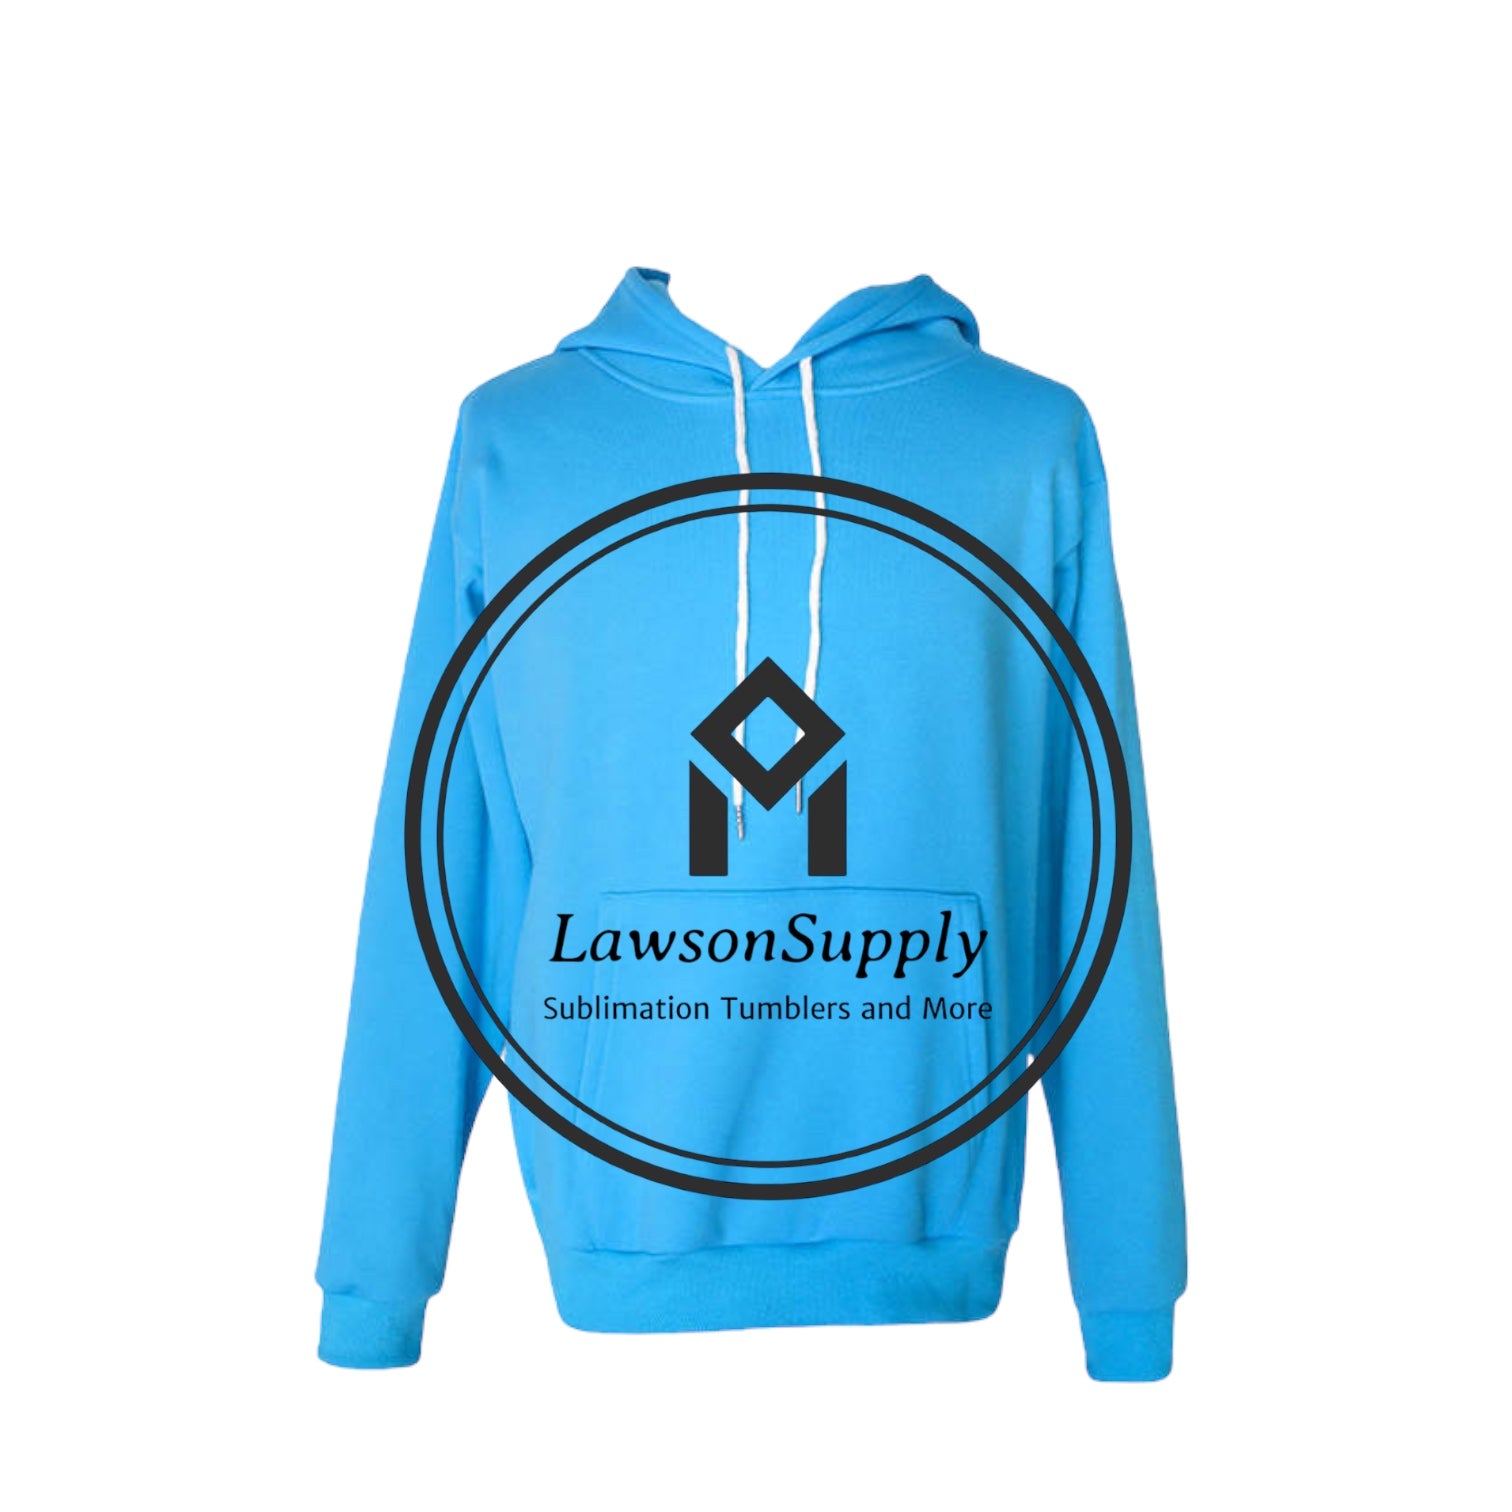 Sublimation Hoodies/pullover 100% Polyester Adult Uni-sex double Layered,  Warm Cotton Feel 